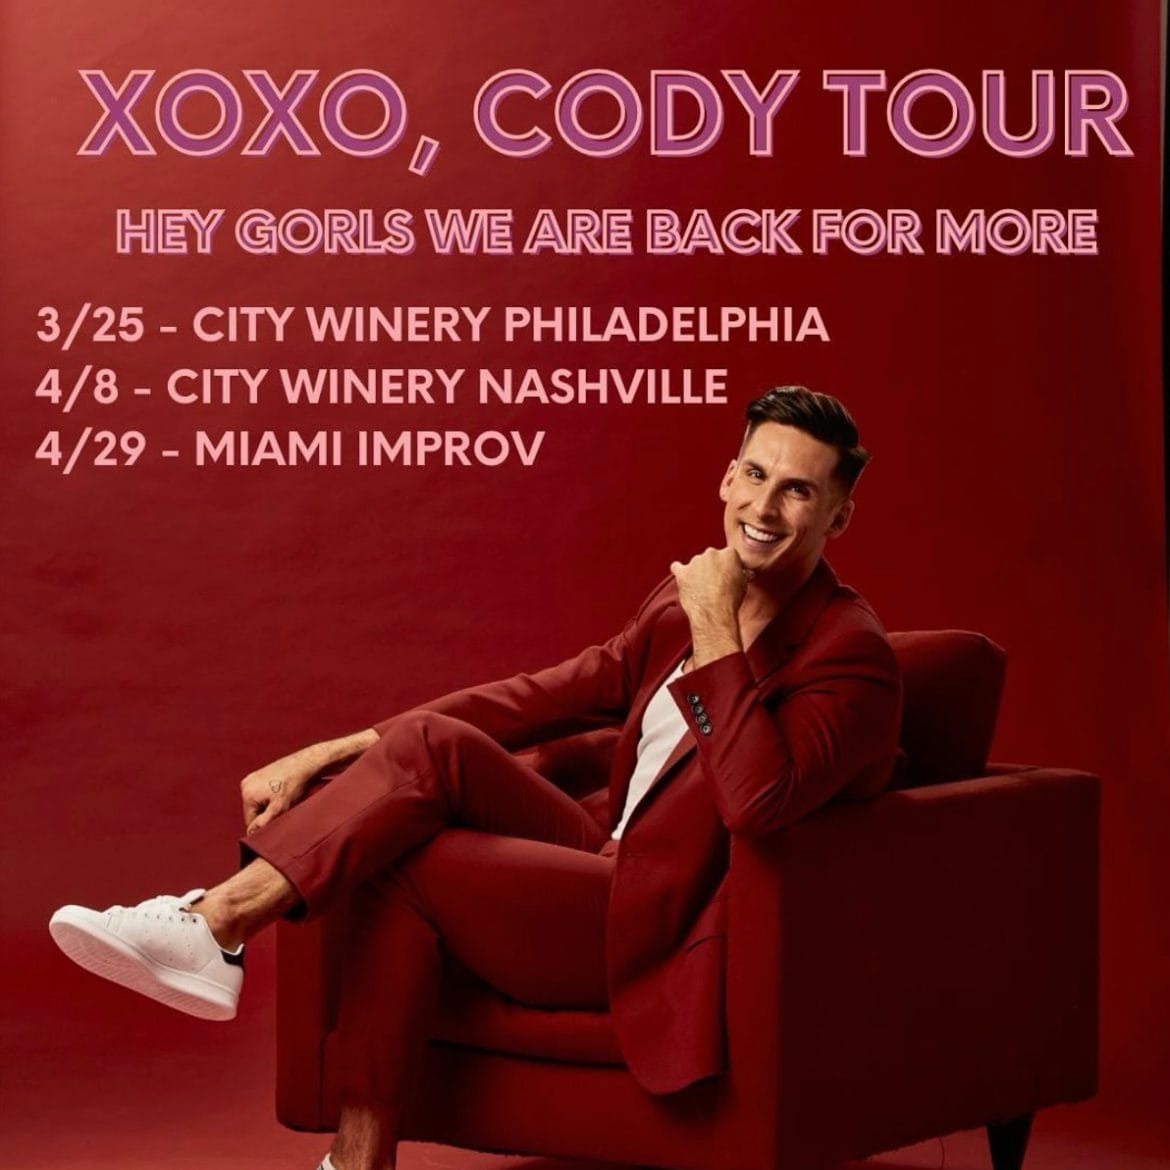 Cody Rigsby's new book tour dates. Image credit Cody's social media.